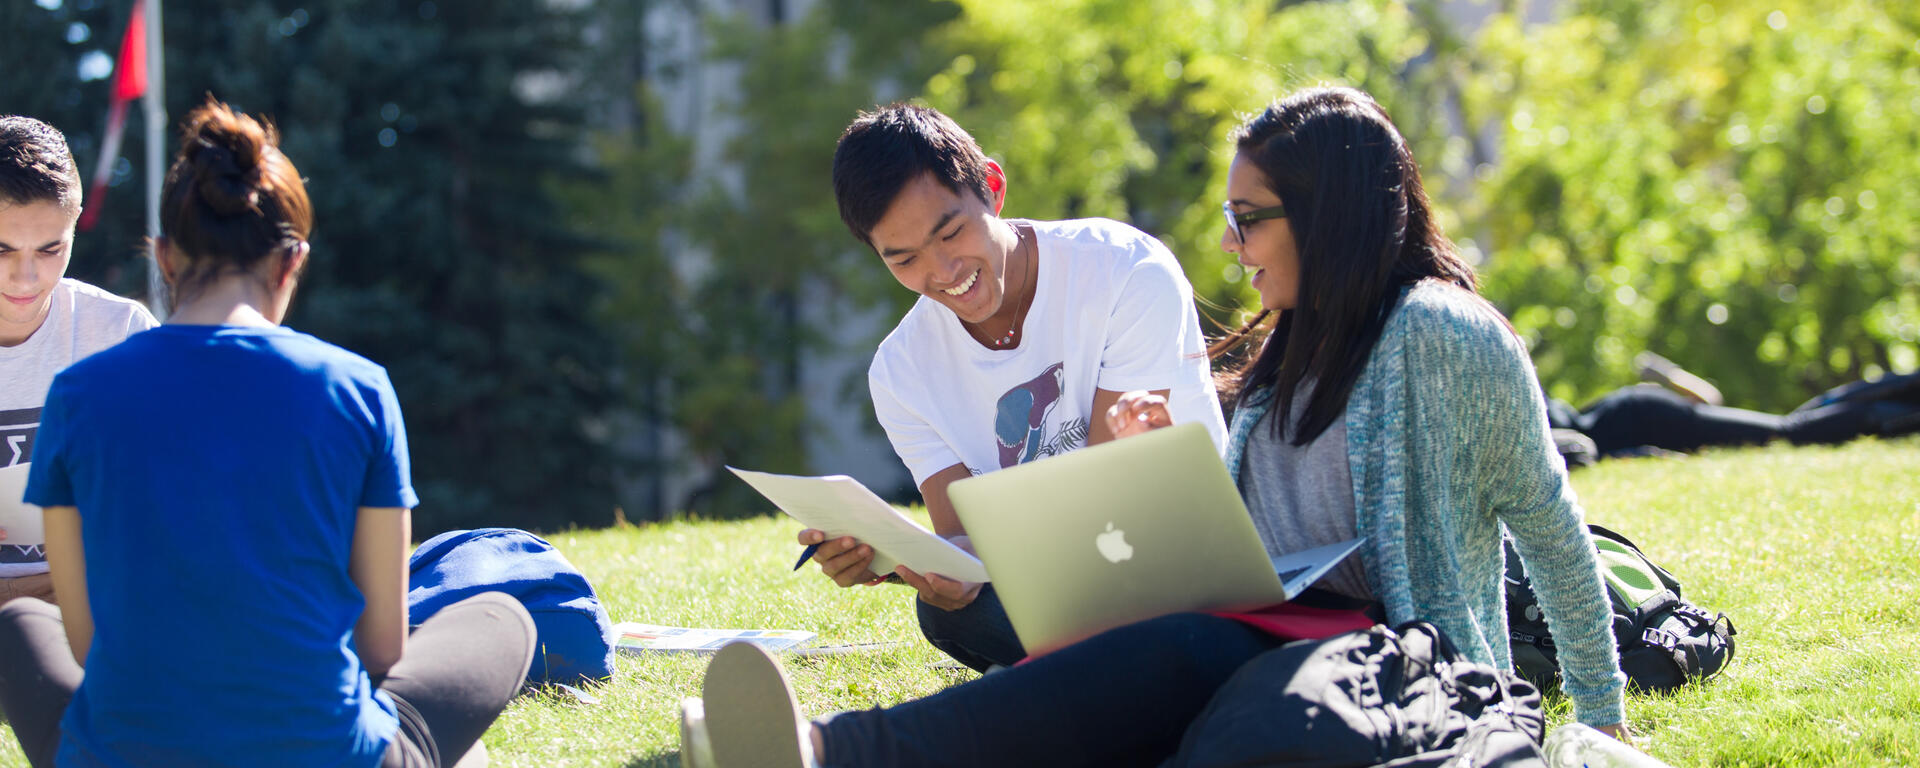 Students sit outside together, looking at papers and a laptop